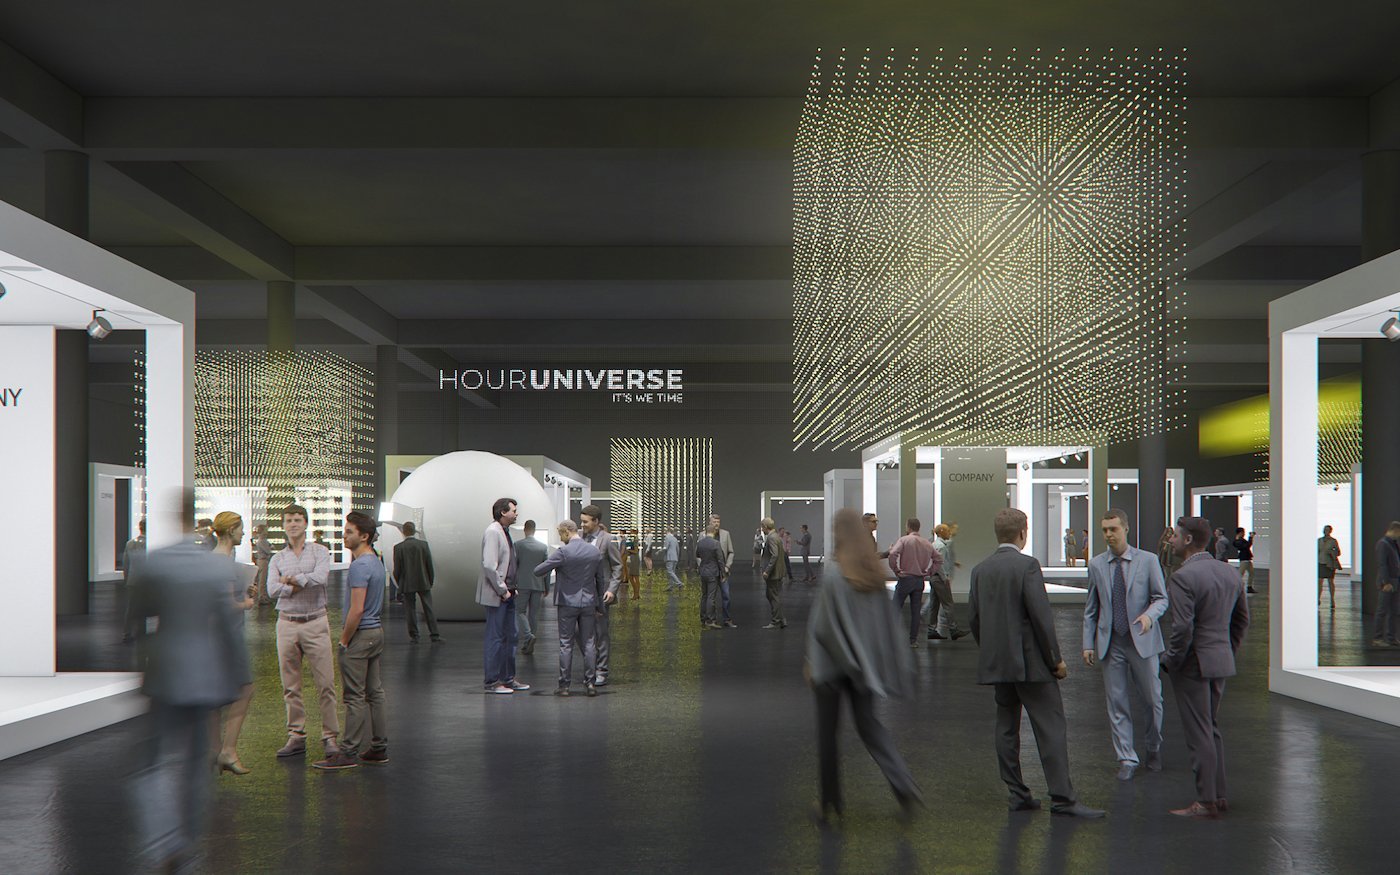 HourUniverse: “We're on track for 2021”